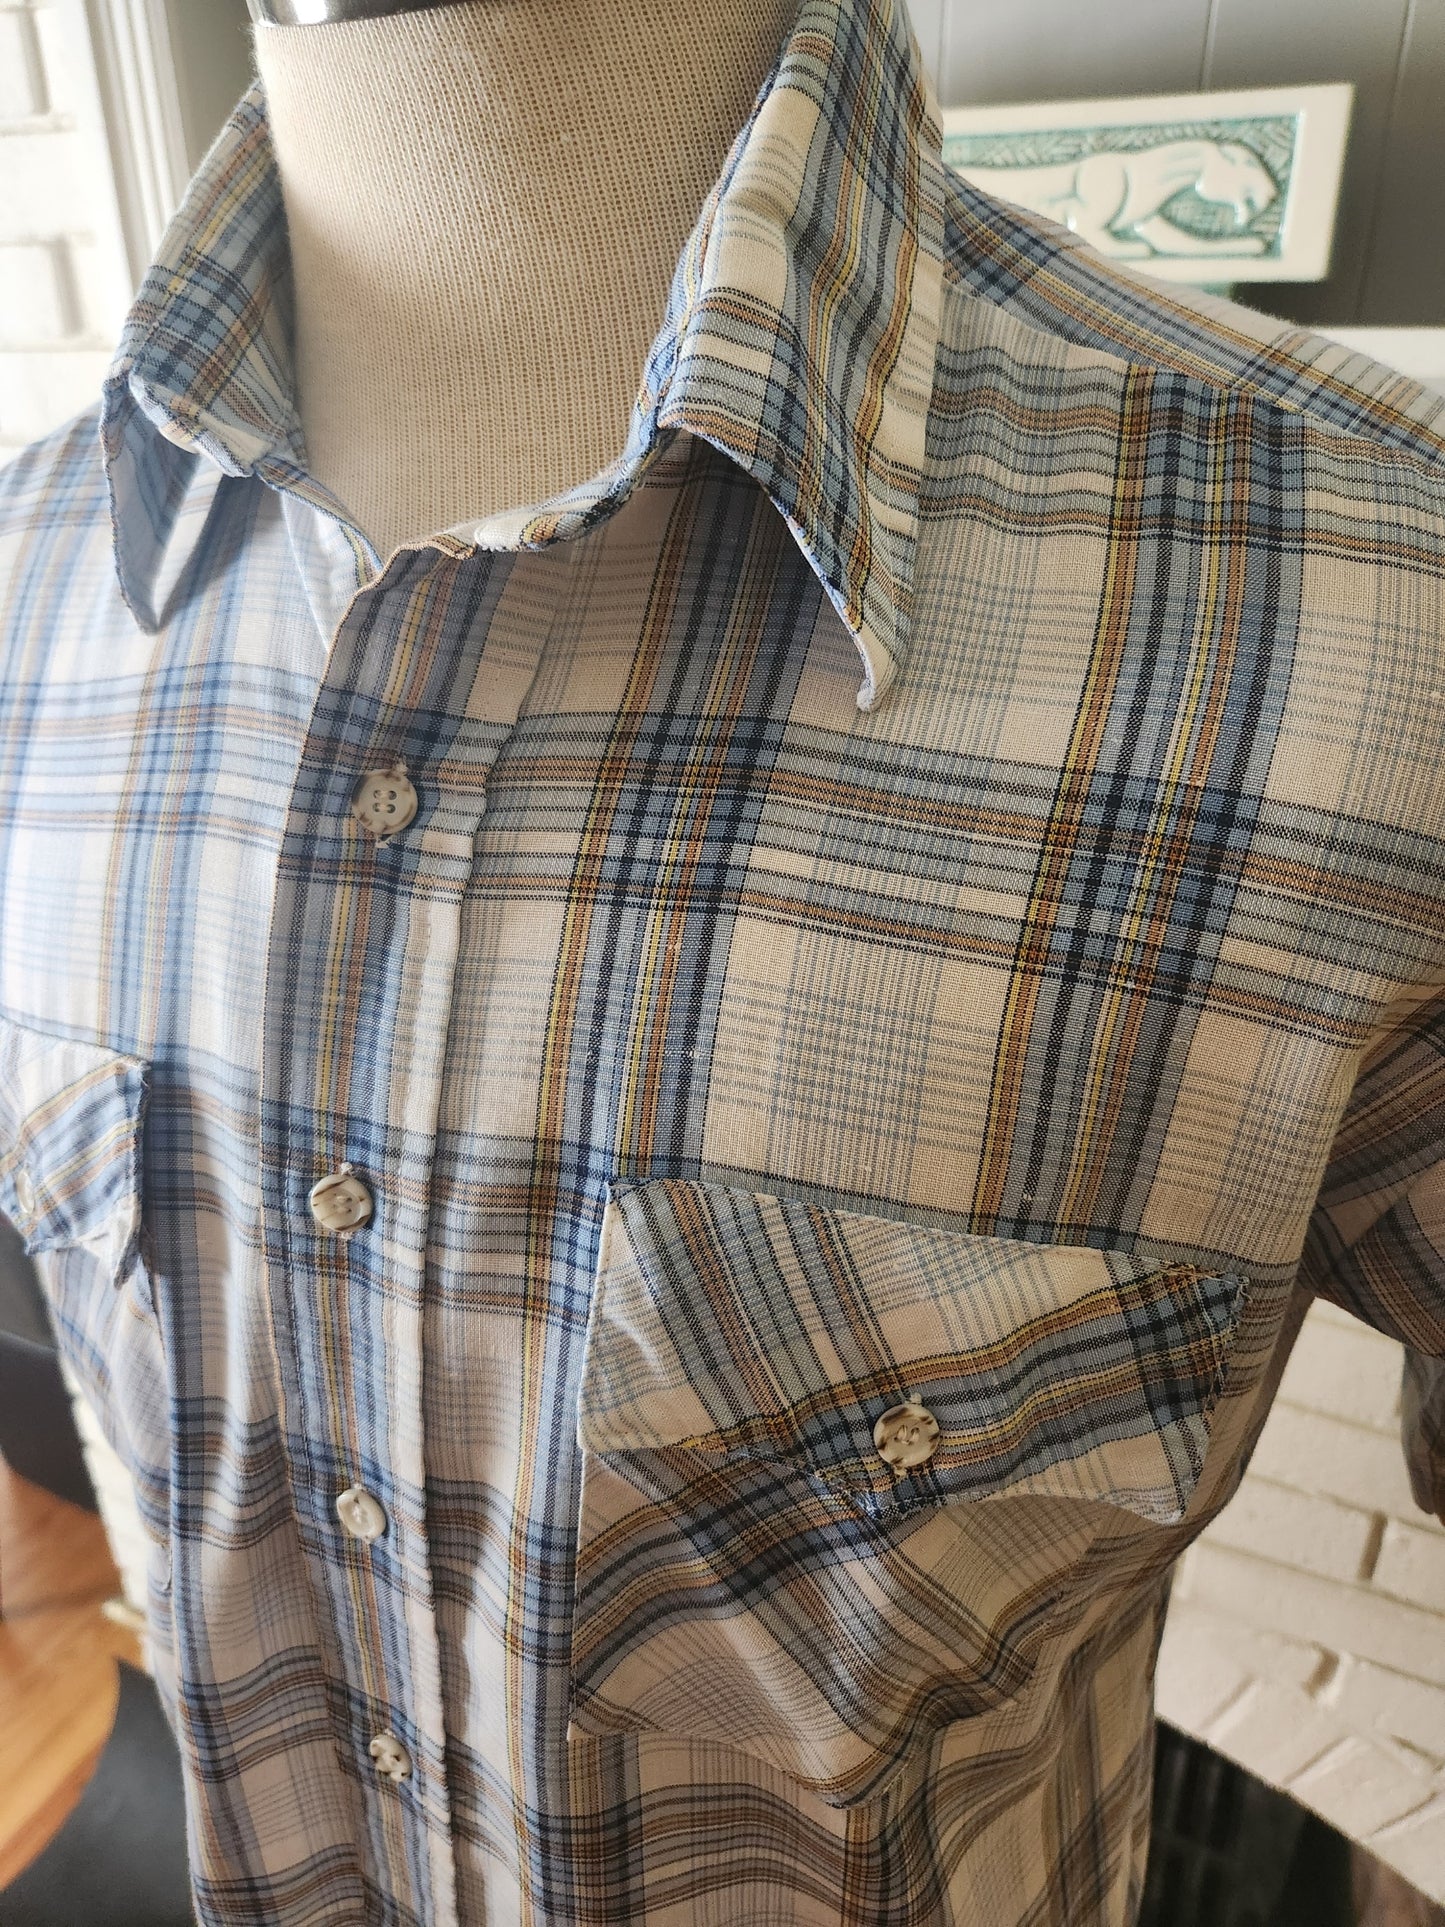 Vintage Short Sleeve Button Down Shirt by Campus